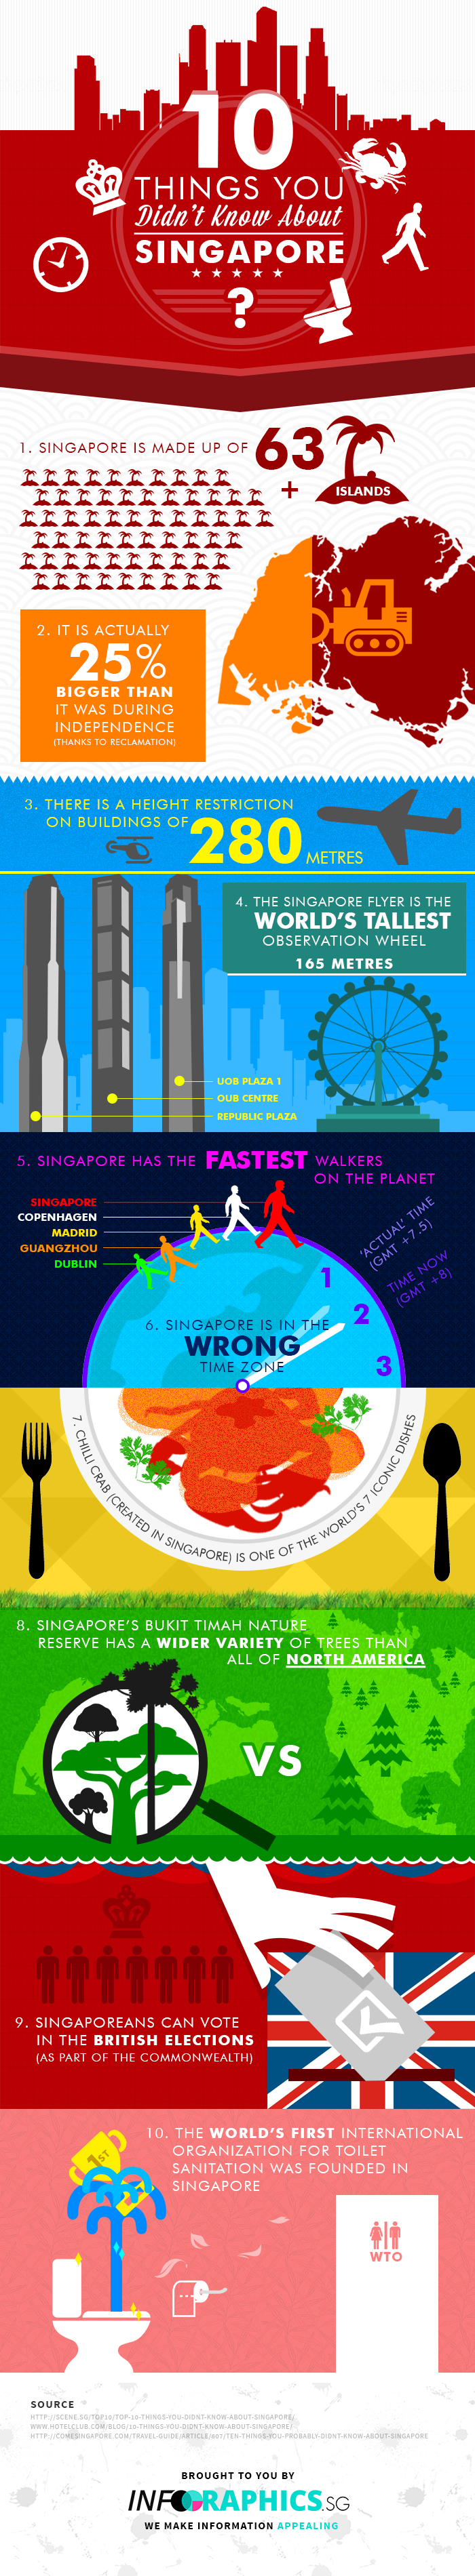 10-Things-About-Singapore.png